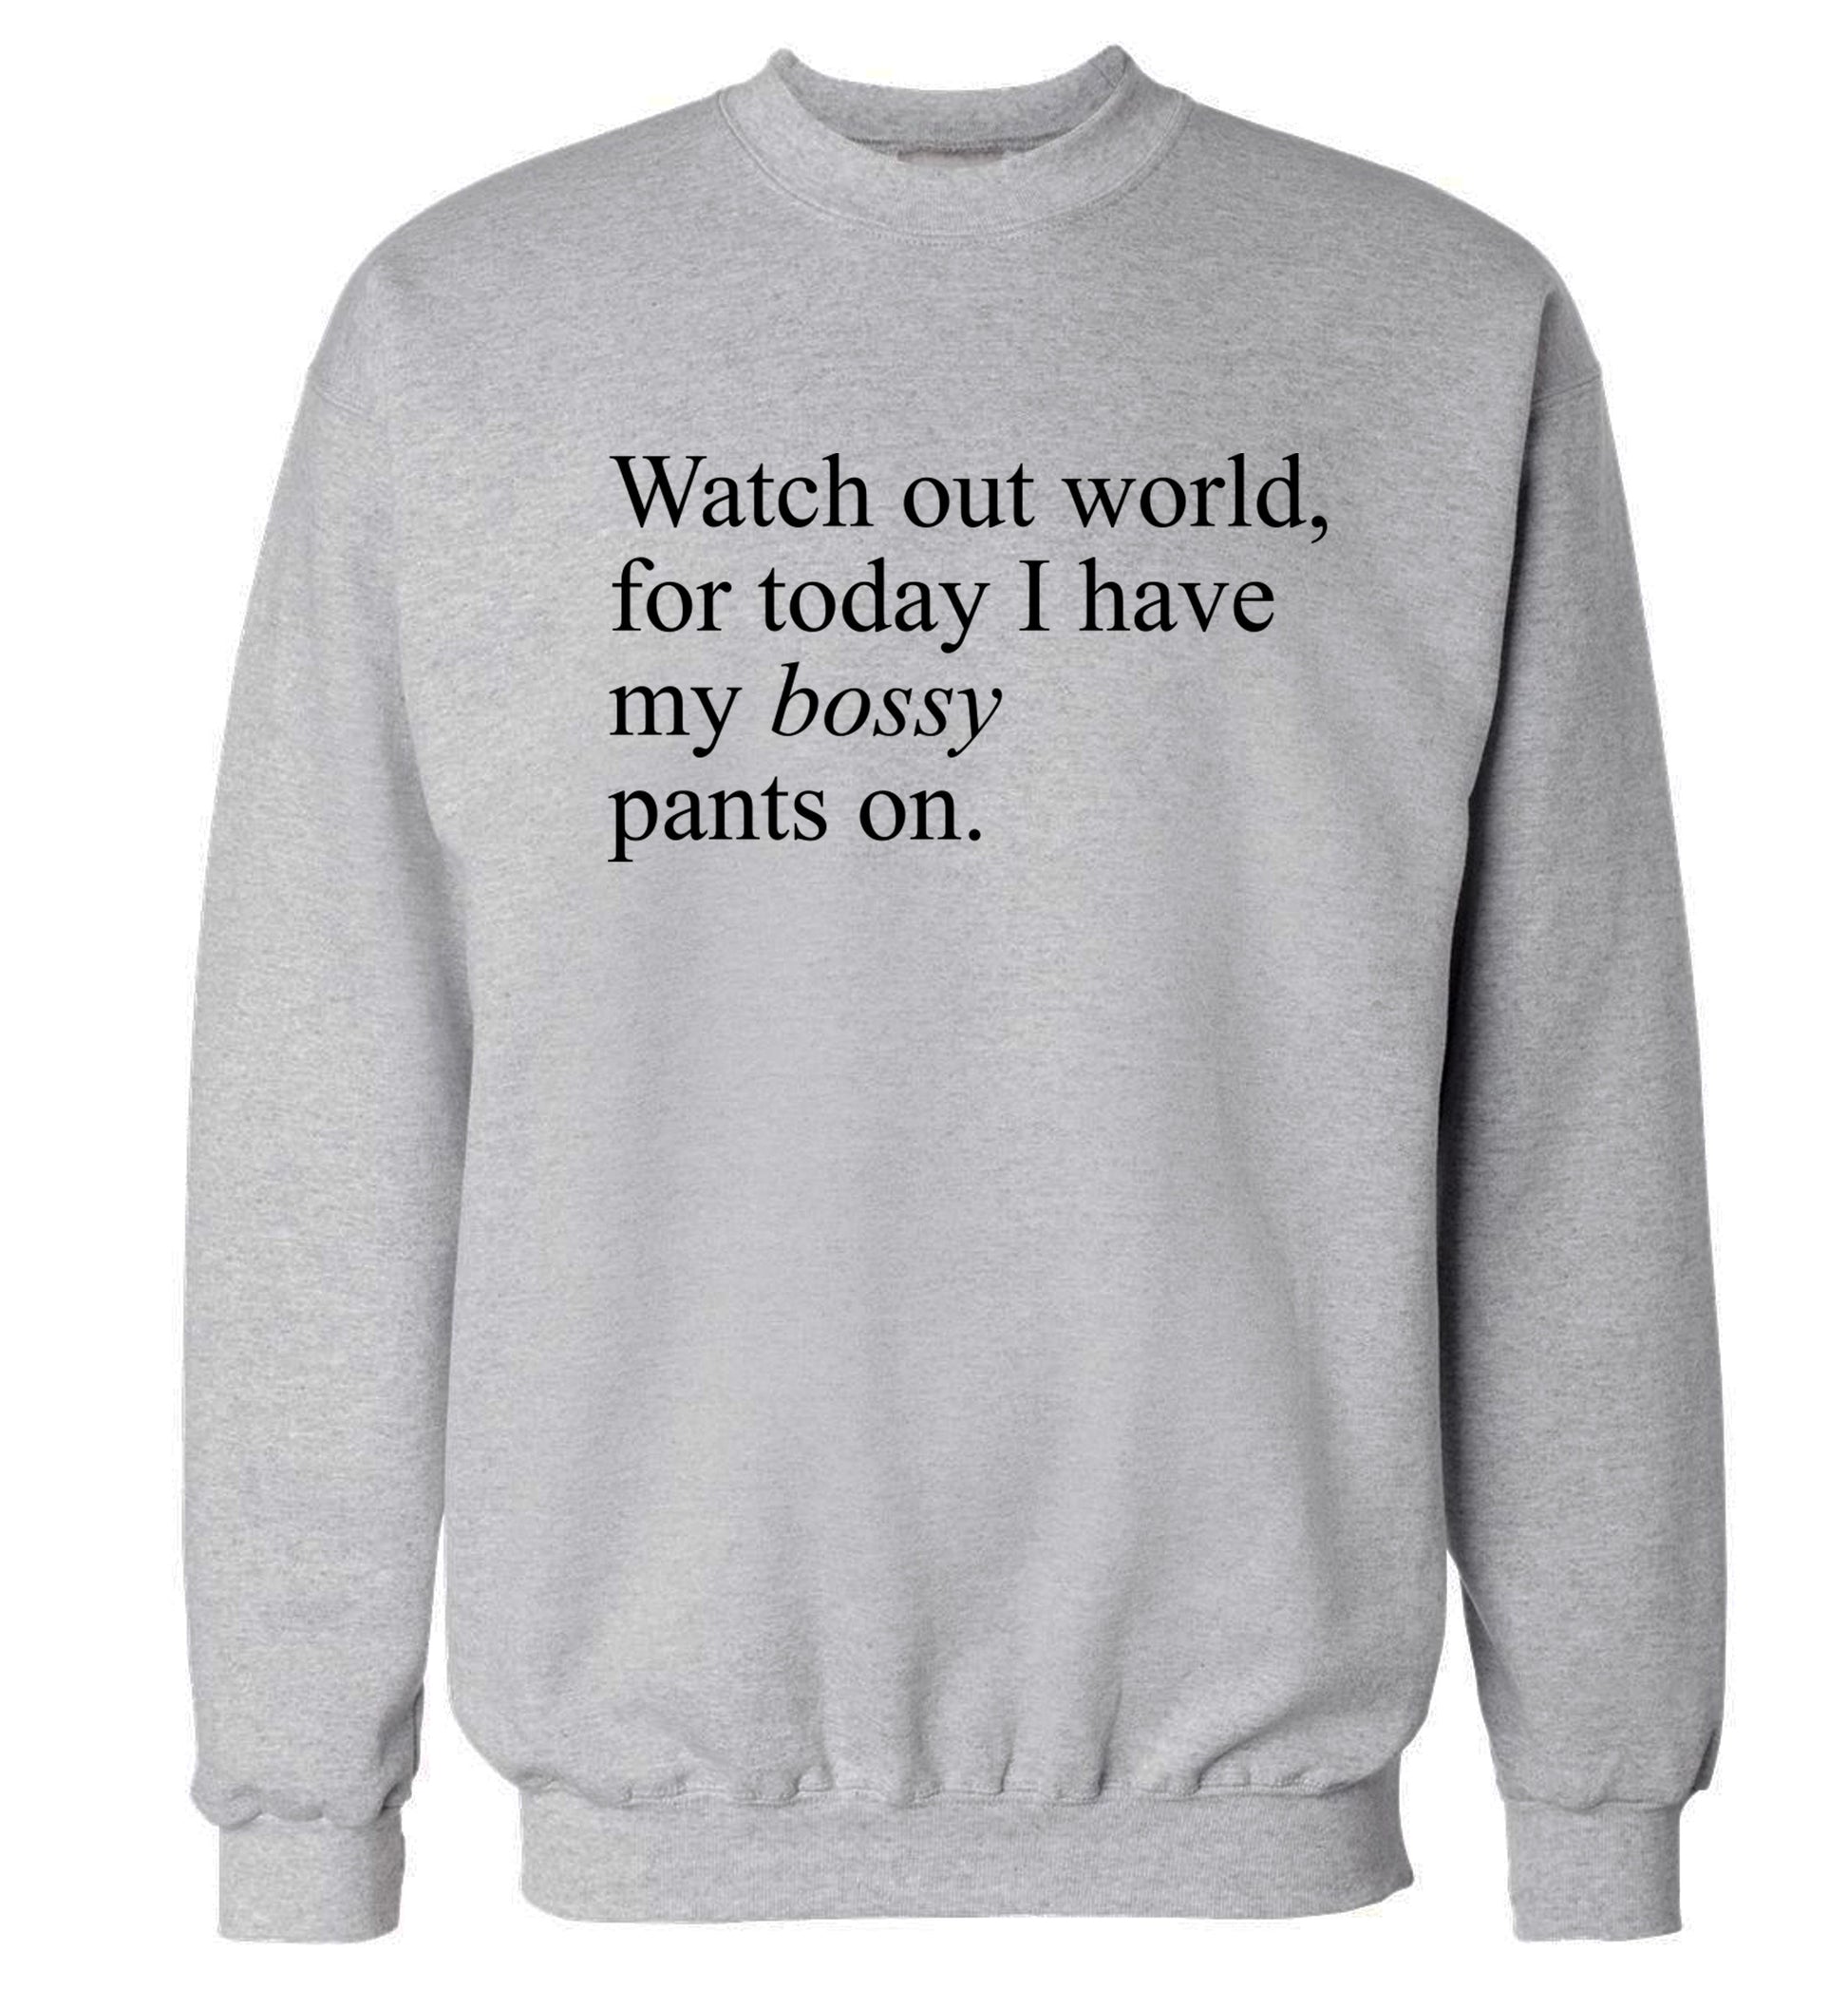 Watch out world, for today I have my bossy pants on Adult's unisex grey Sweater 2XL